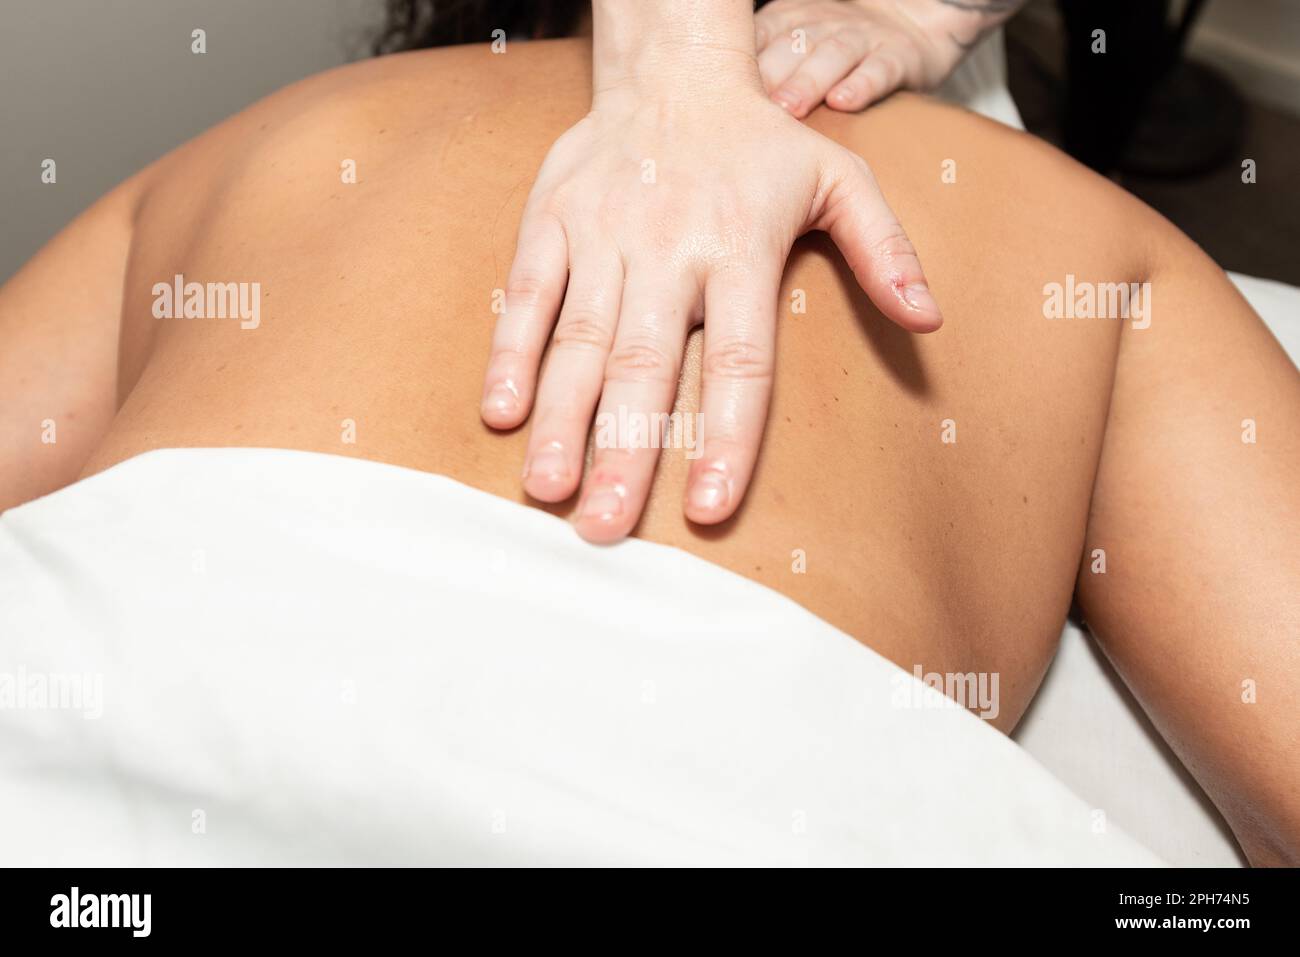 Massage therapist strong hands provide long and steady palm pressure on muscle stimulating strokes. Stock Photo